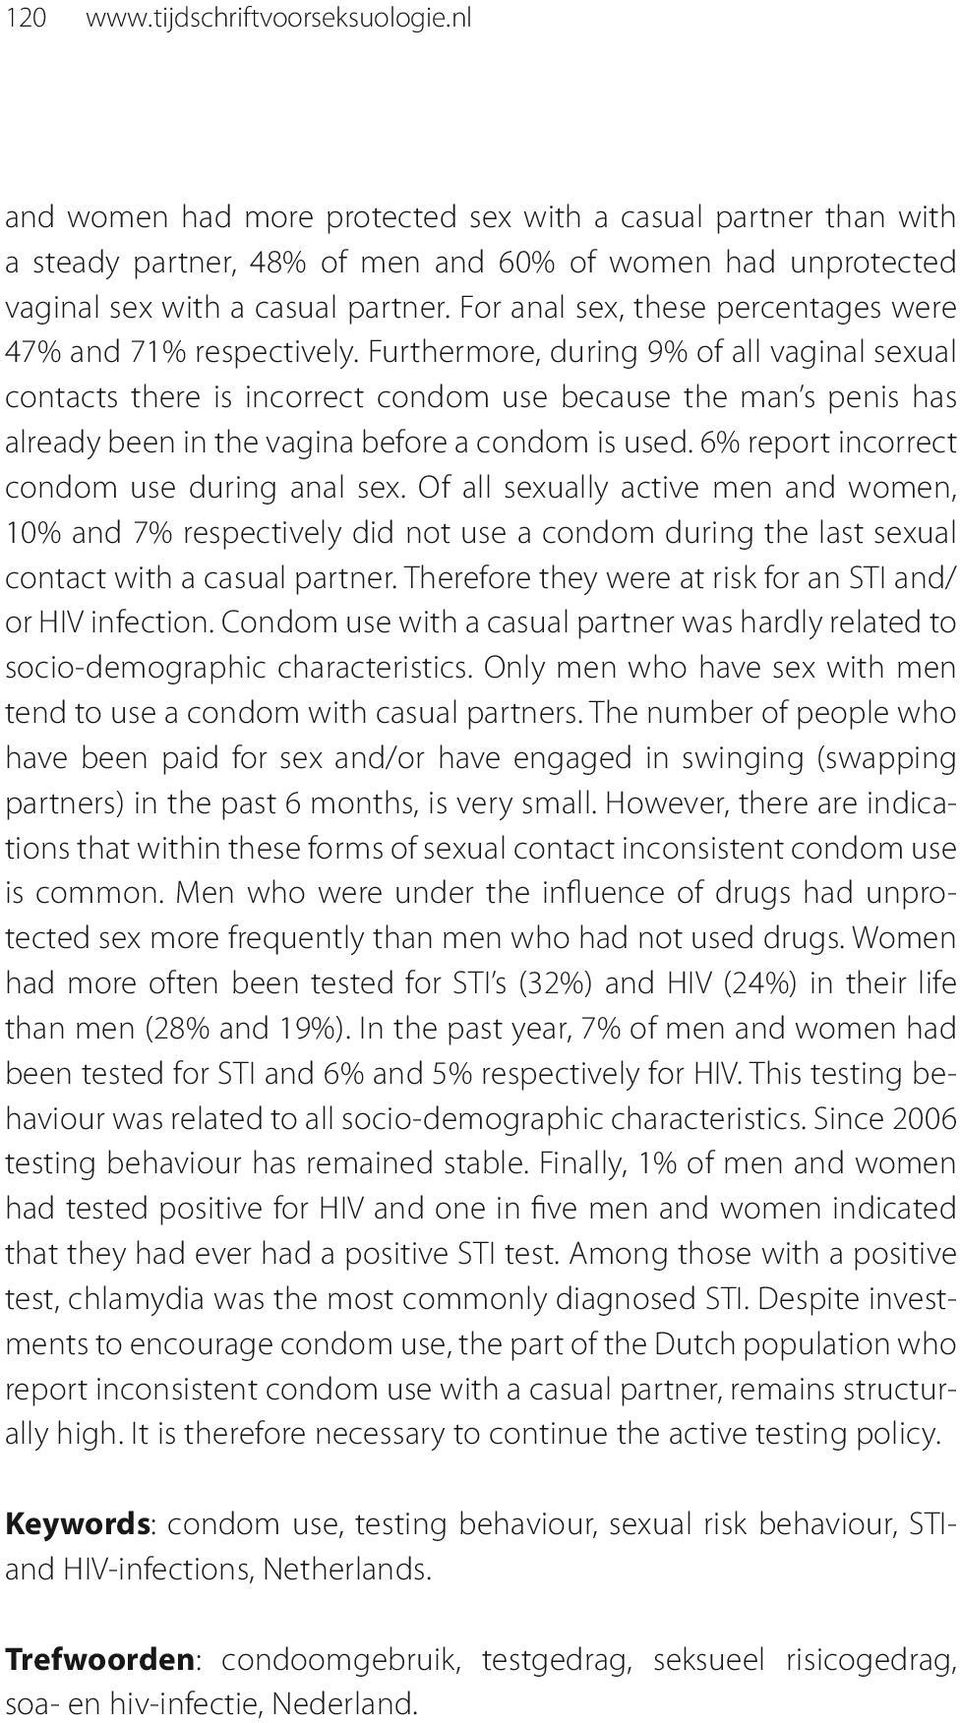 Furthermore, during 9% of all vaginal sexual contacts there is incorrect condom use because the man s penis has already been in the vagina before a condom is used.